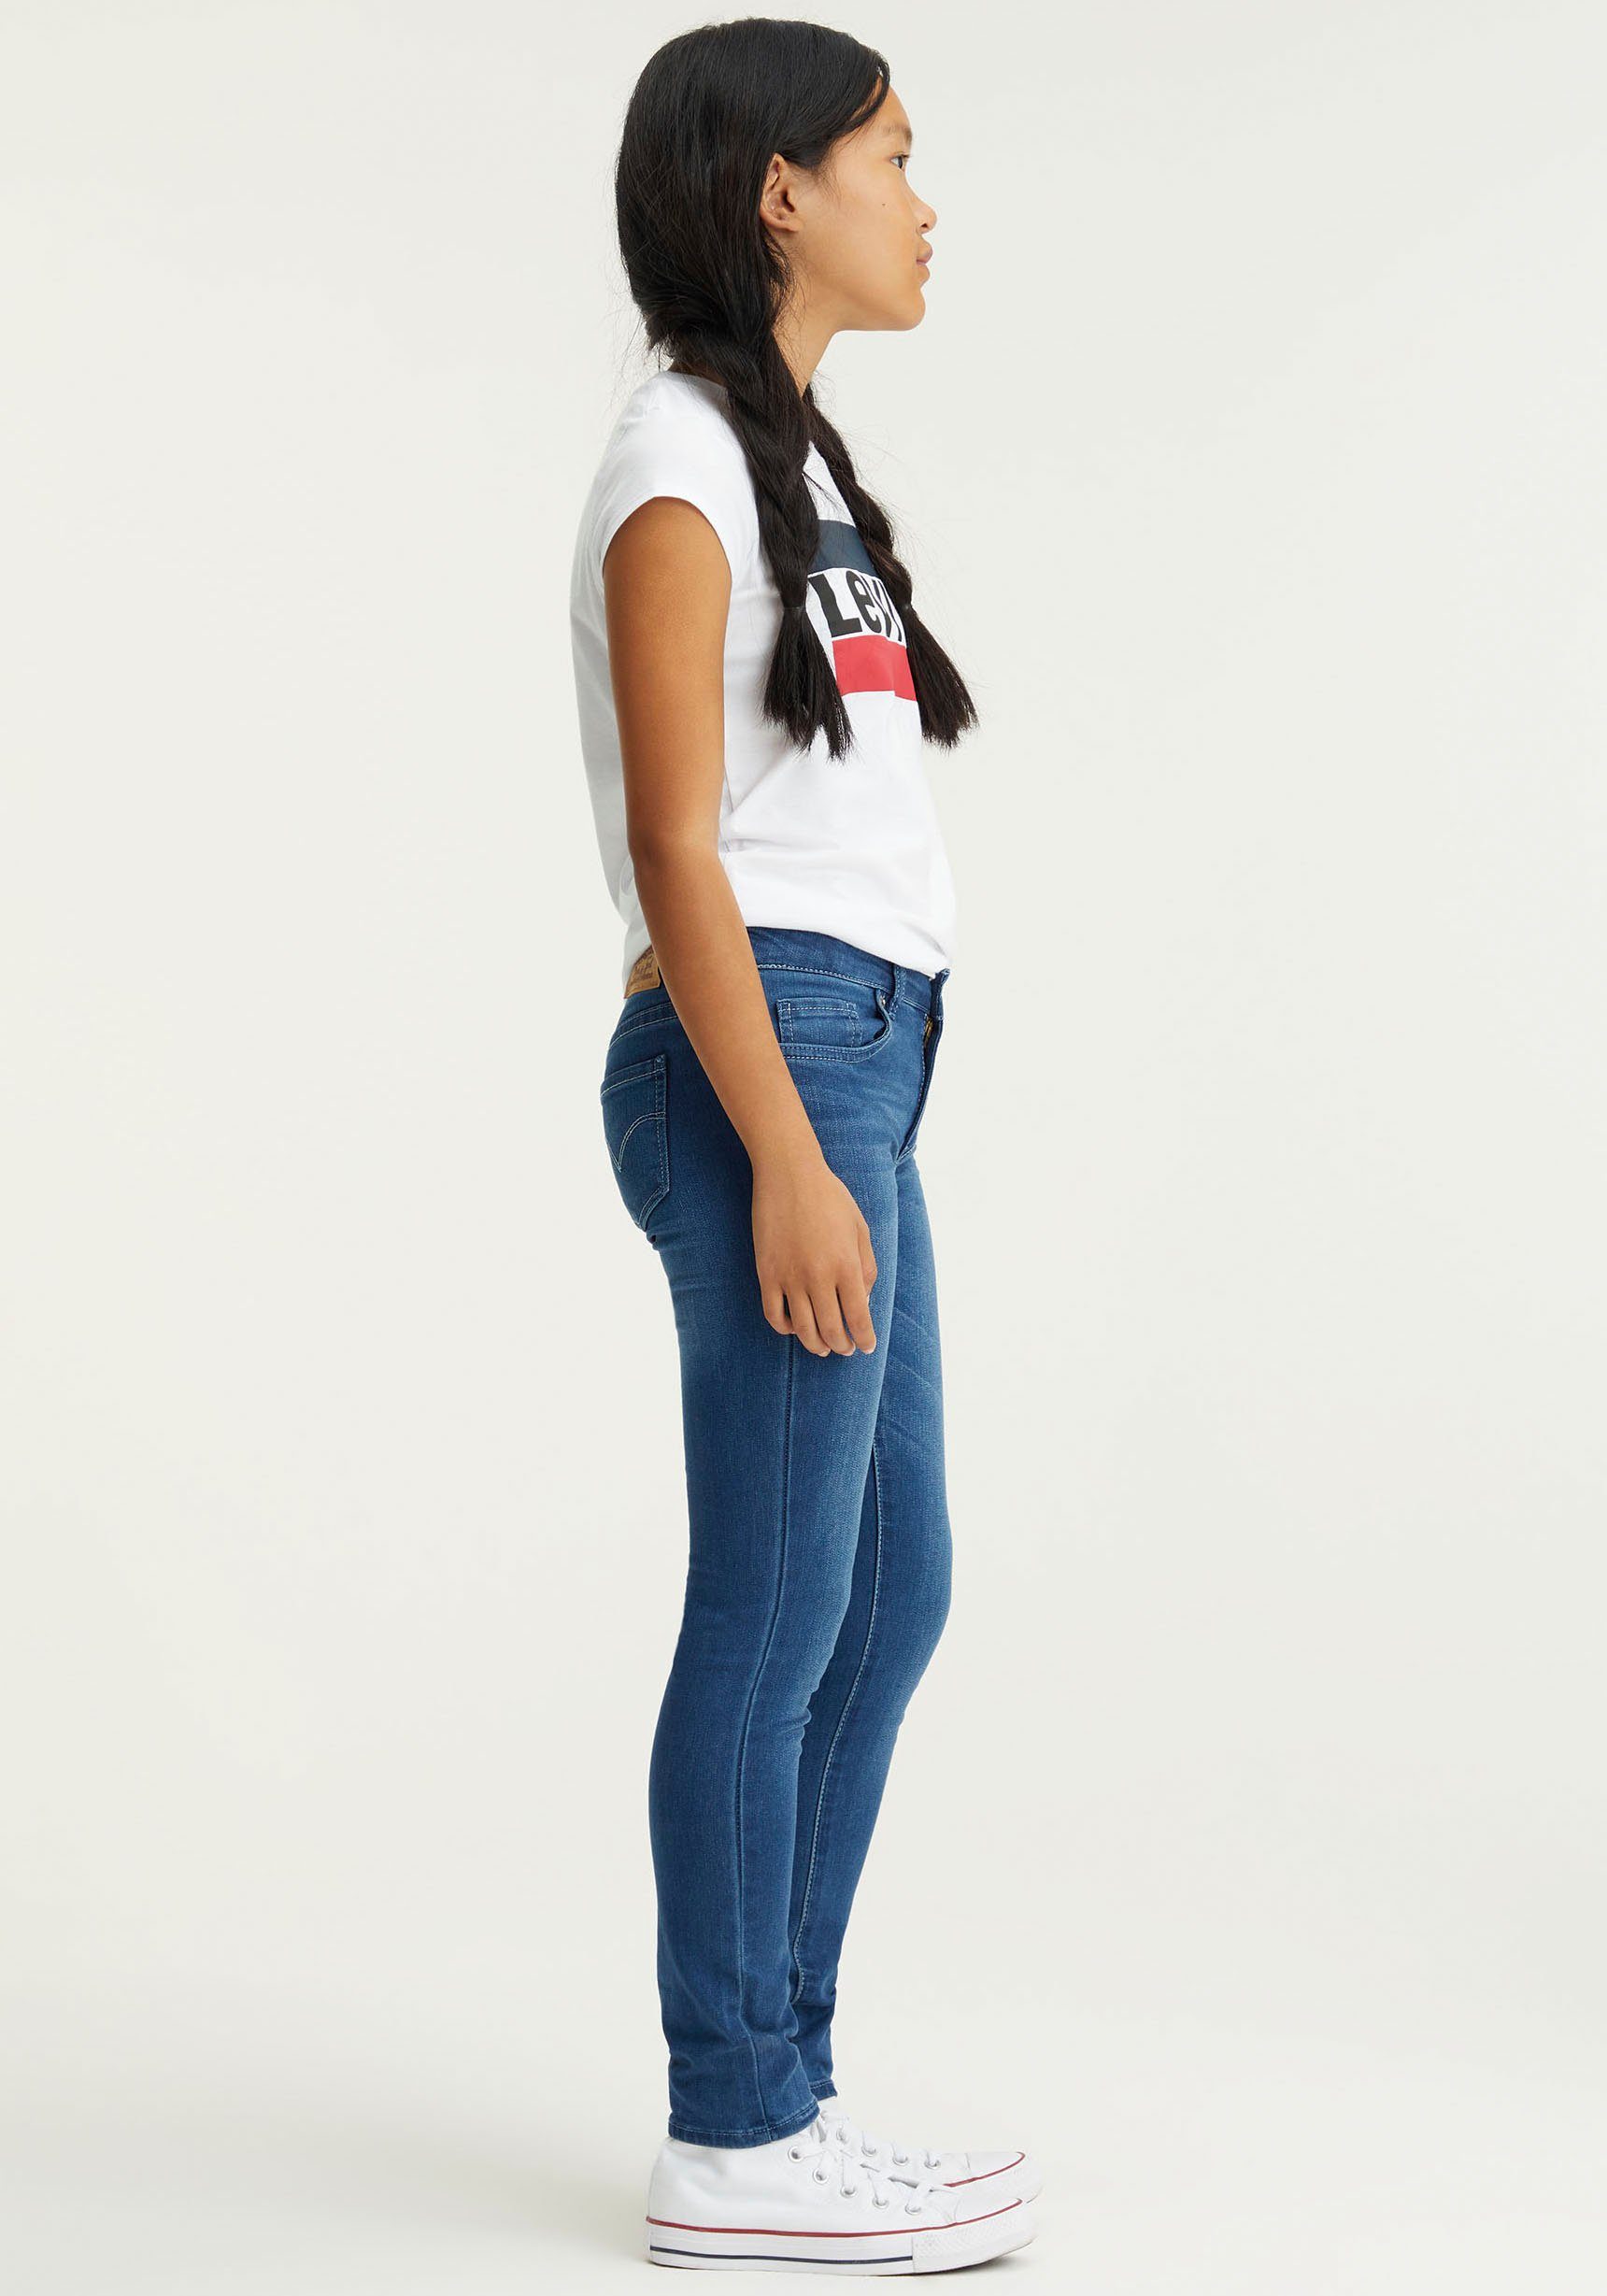 JEANS GIRLS SKINNY for FIT Levi's® Stretch-Jeans 711™ Kids